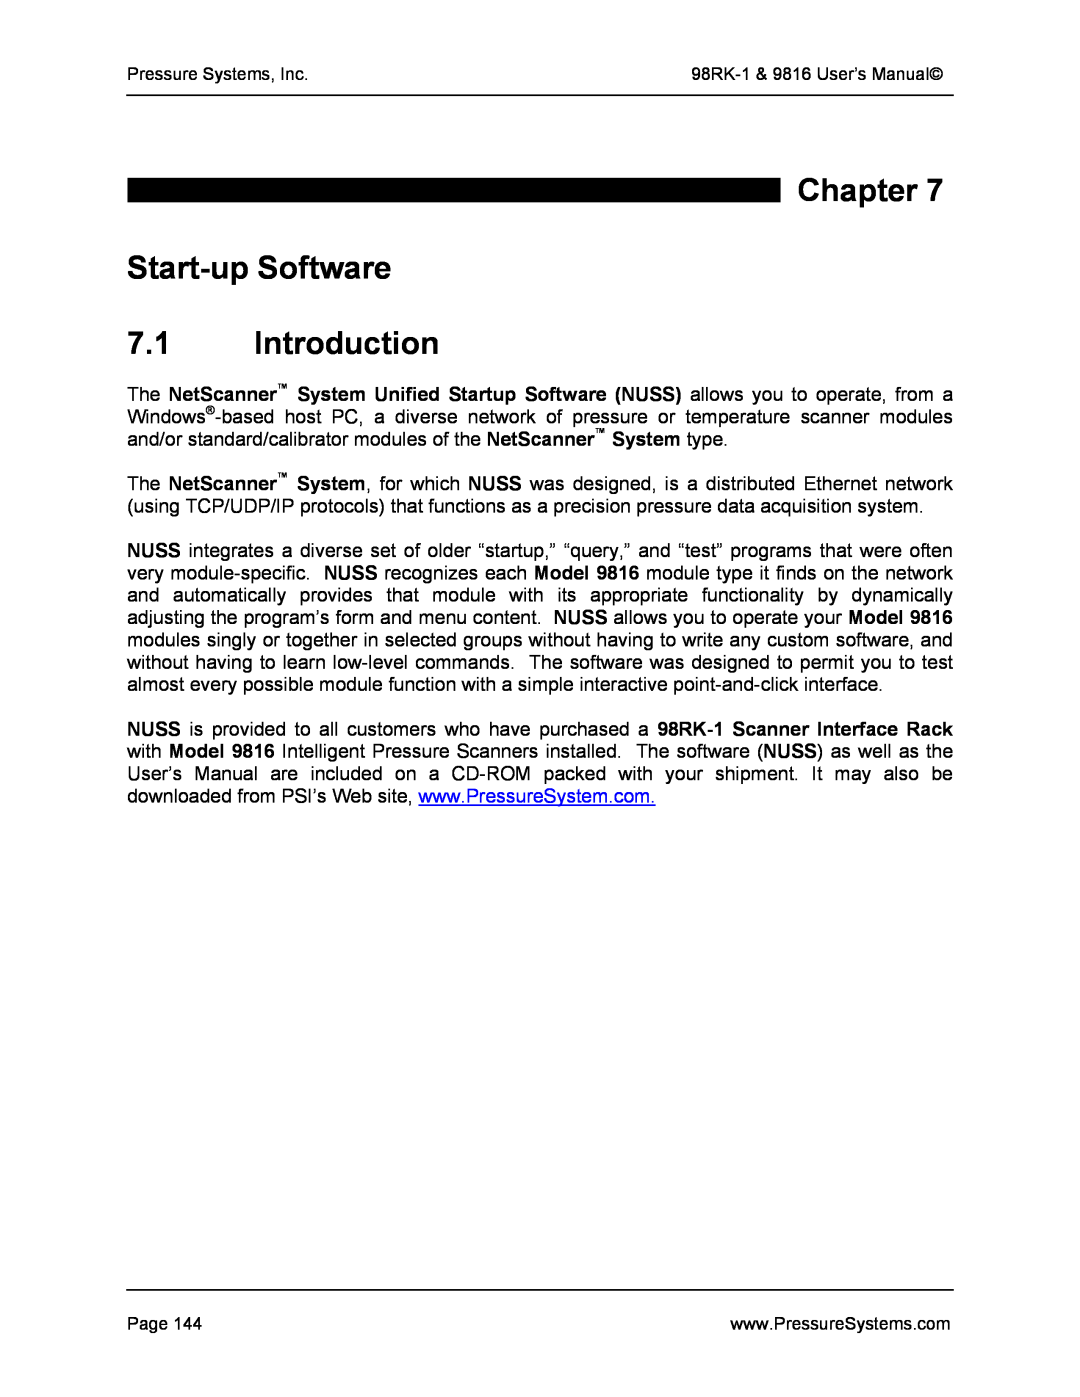 Pressure Systems 98RK-1 user manual Chapter Start-up Software 7.1 Introduction 